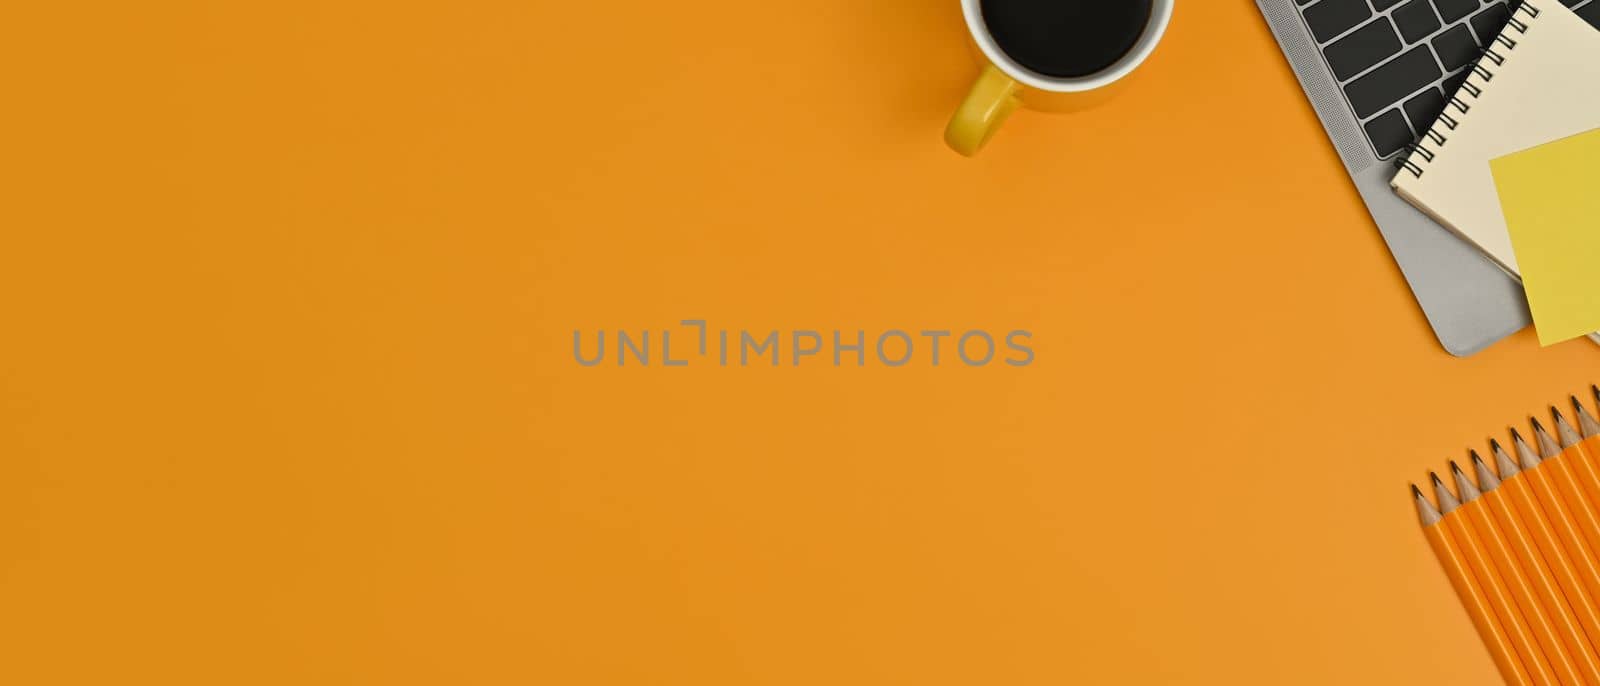 Laptop computer, notepad and coffee cup on yellow background. Copy space for your advertise text.